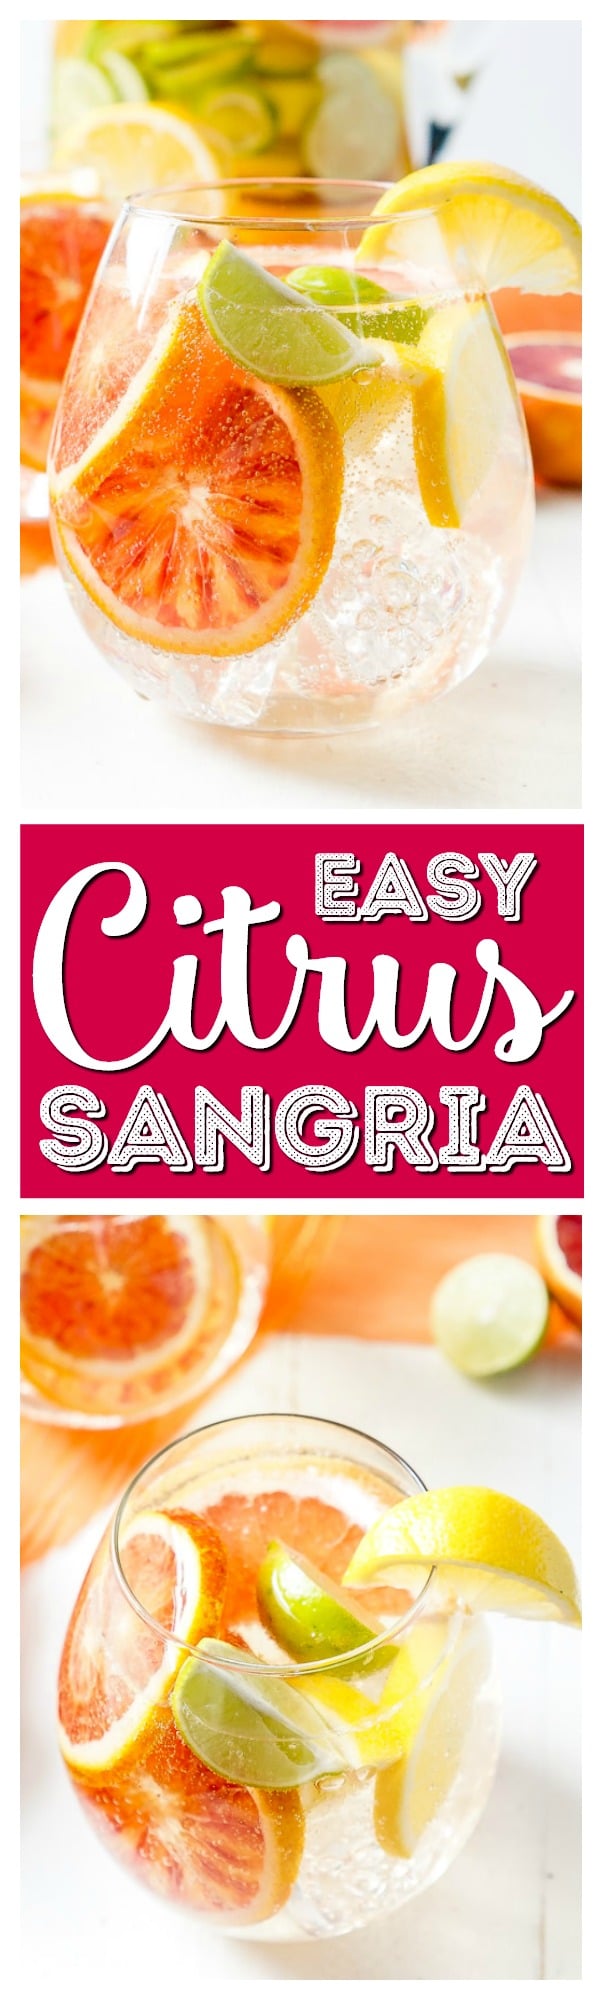 This Citrus Sangria is packed with fresh ruby red grapefruit, blood oranges, lemons, and key limes for a bright and zesty cocktail perfect for a party! via @sugarandsoulco